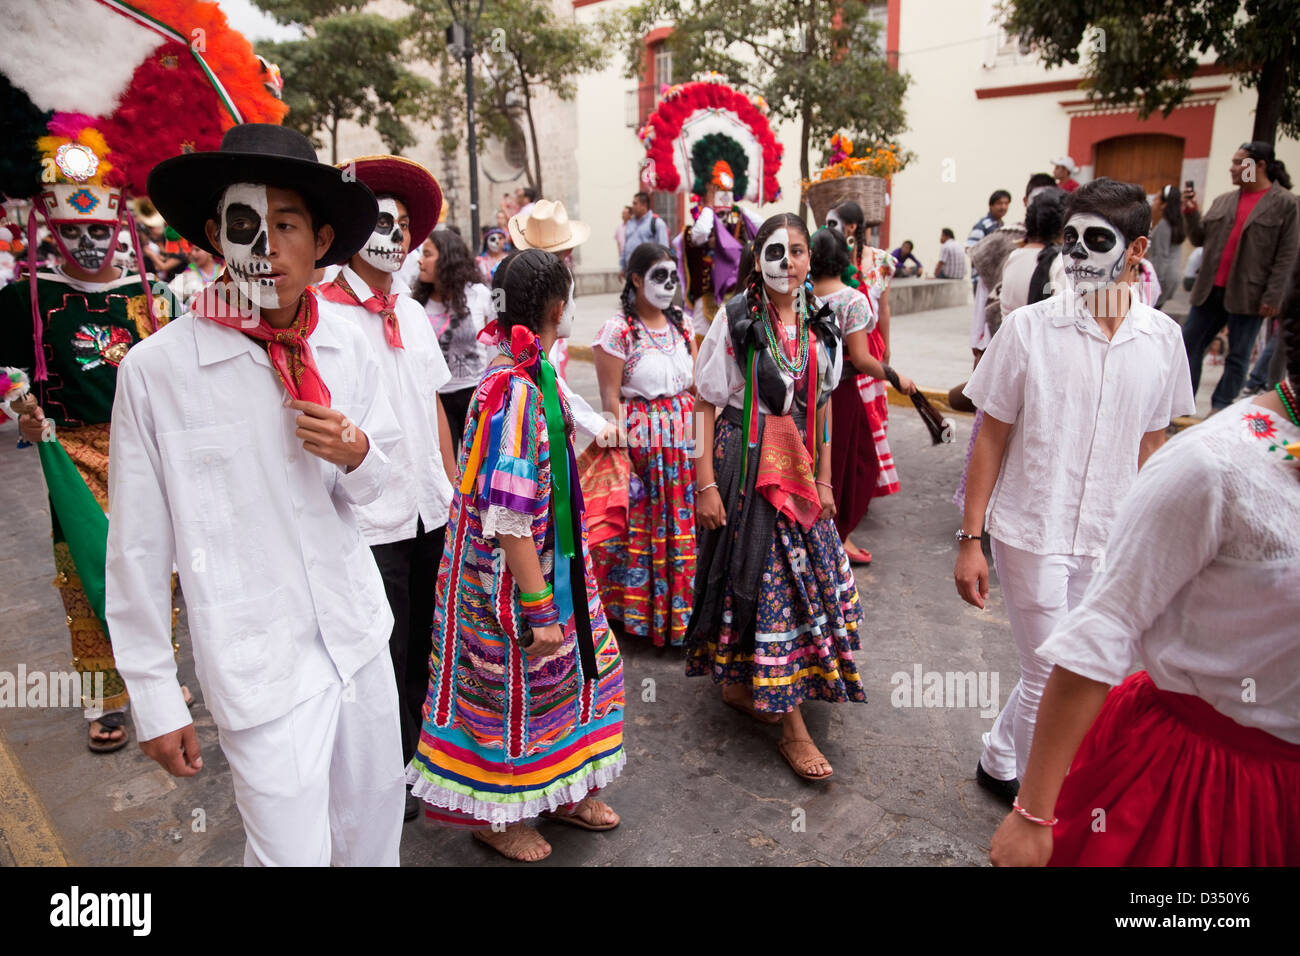 Day of the Dead parade with participants in traditional clothing and spectators in Oaxaca, Mexico. Stock Photo